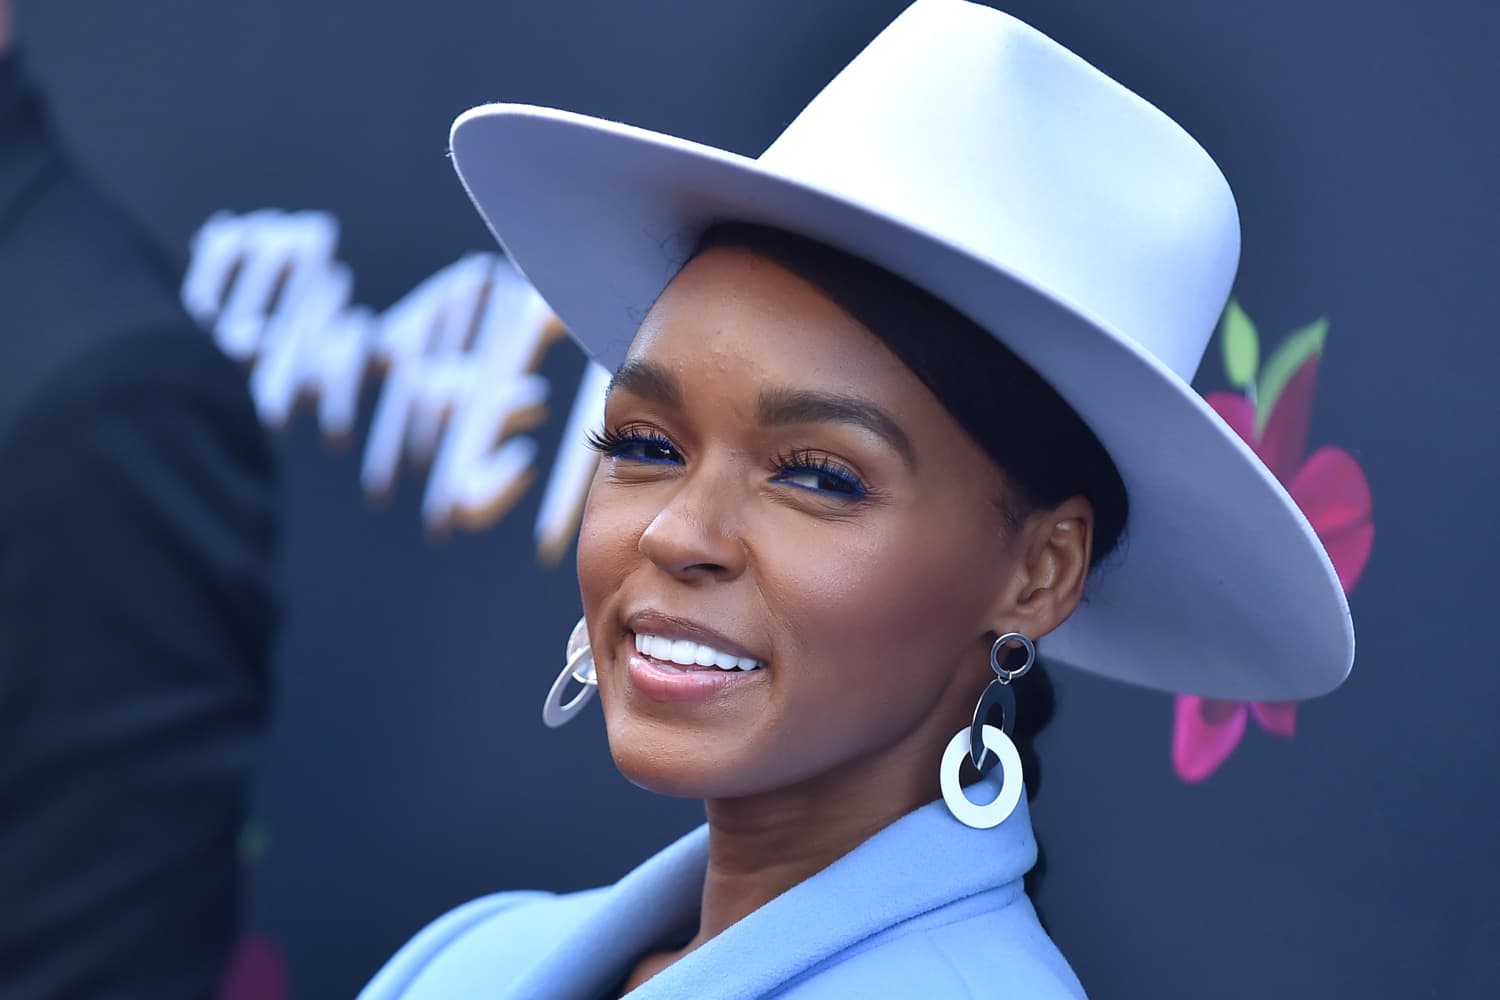 Let’s All Appreciate This Janelle Monáe-Approved “Black Hole” Rug ...